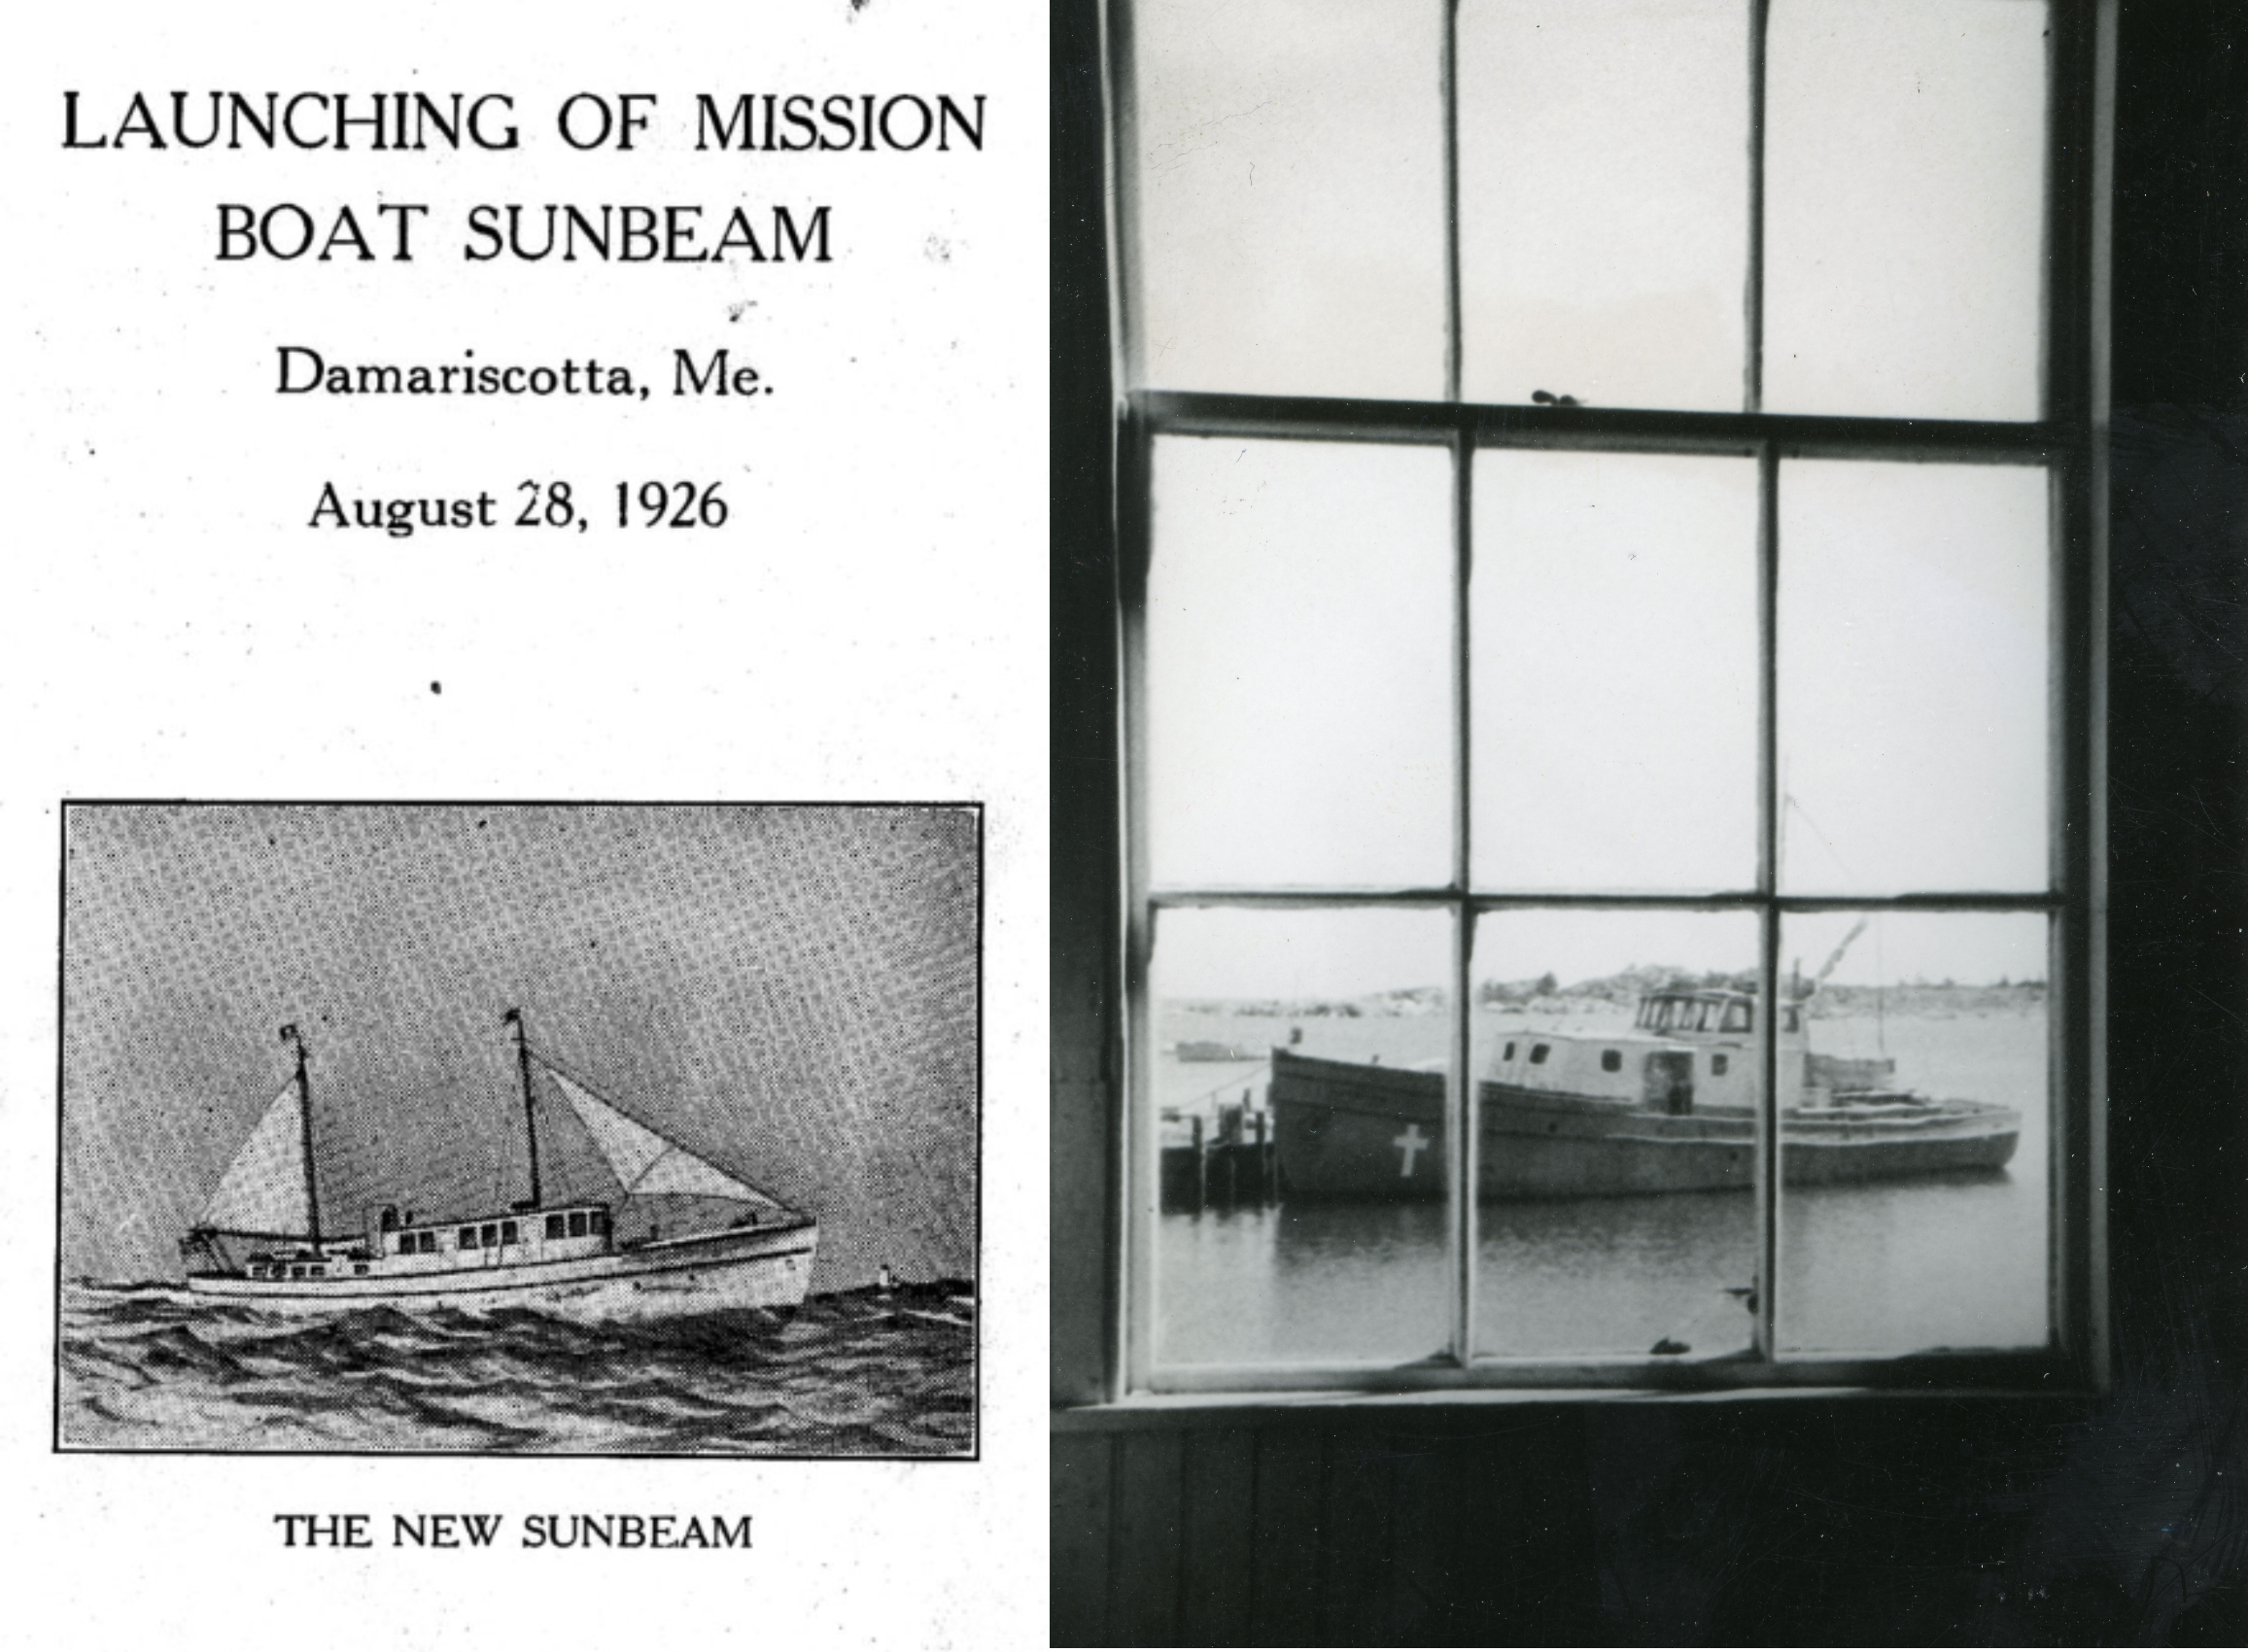 Two black and white photos next to each other. The first is a pamphlet that reads "Launching of the Mission Boat Sunbeam." The second shows the Sunbeam through the window of a house